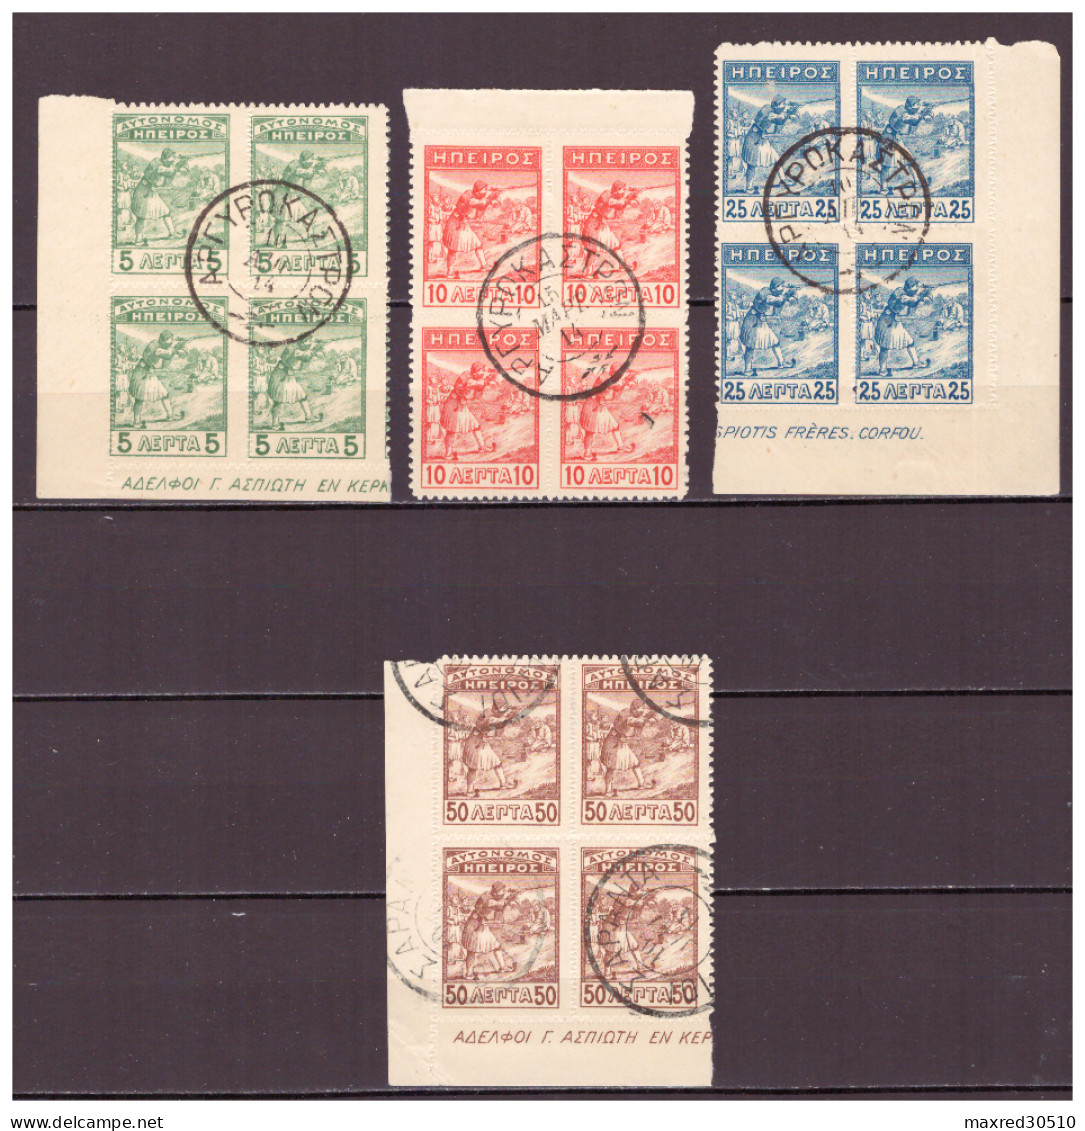 GREECE AUTONOMOUS EPIRUS 1914 4 VALUES FROM THE SET "MARKSMEN" IN BLOCKS OF 4 CANCELLED TO ORDER WITH, SEE DESCRIPTION. - North Epirus